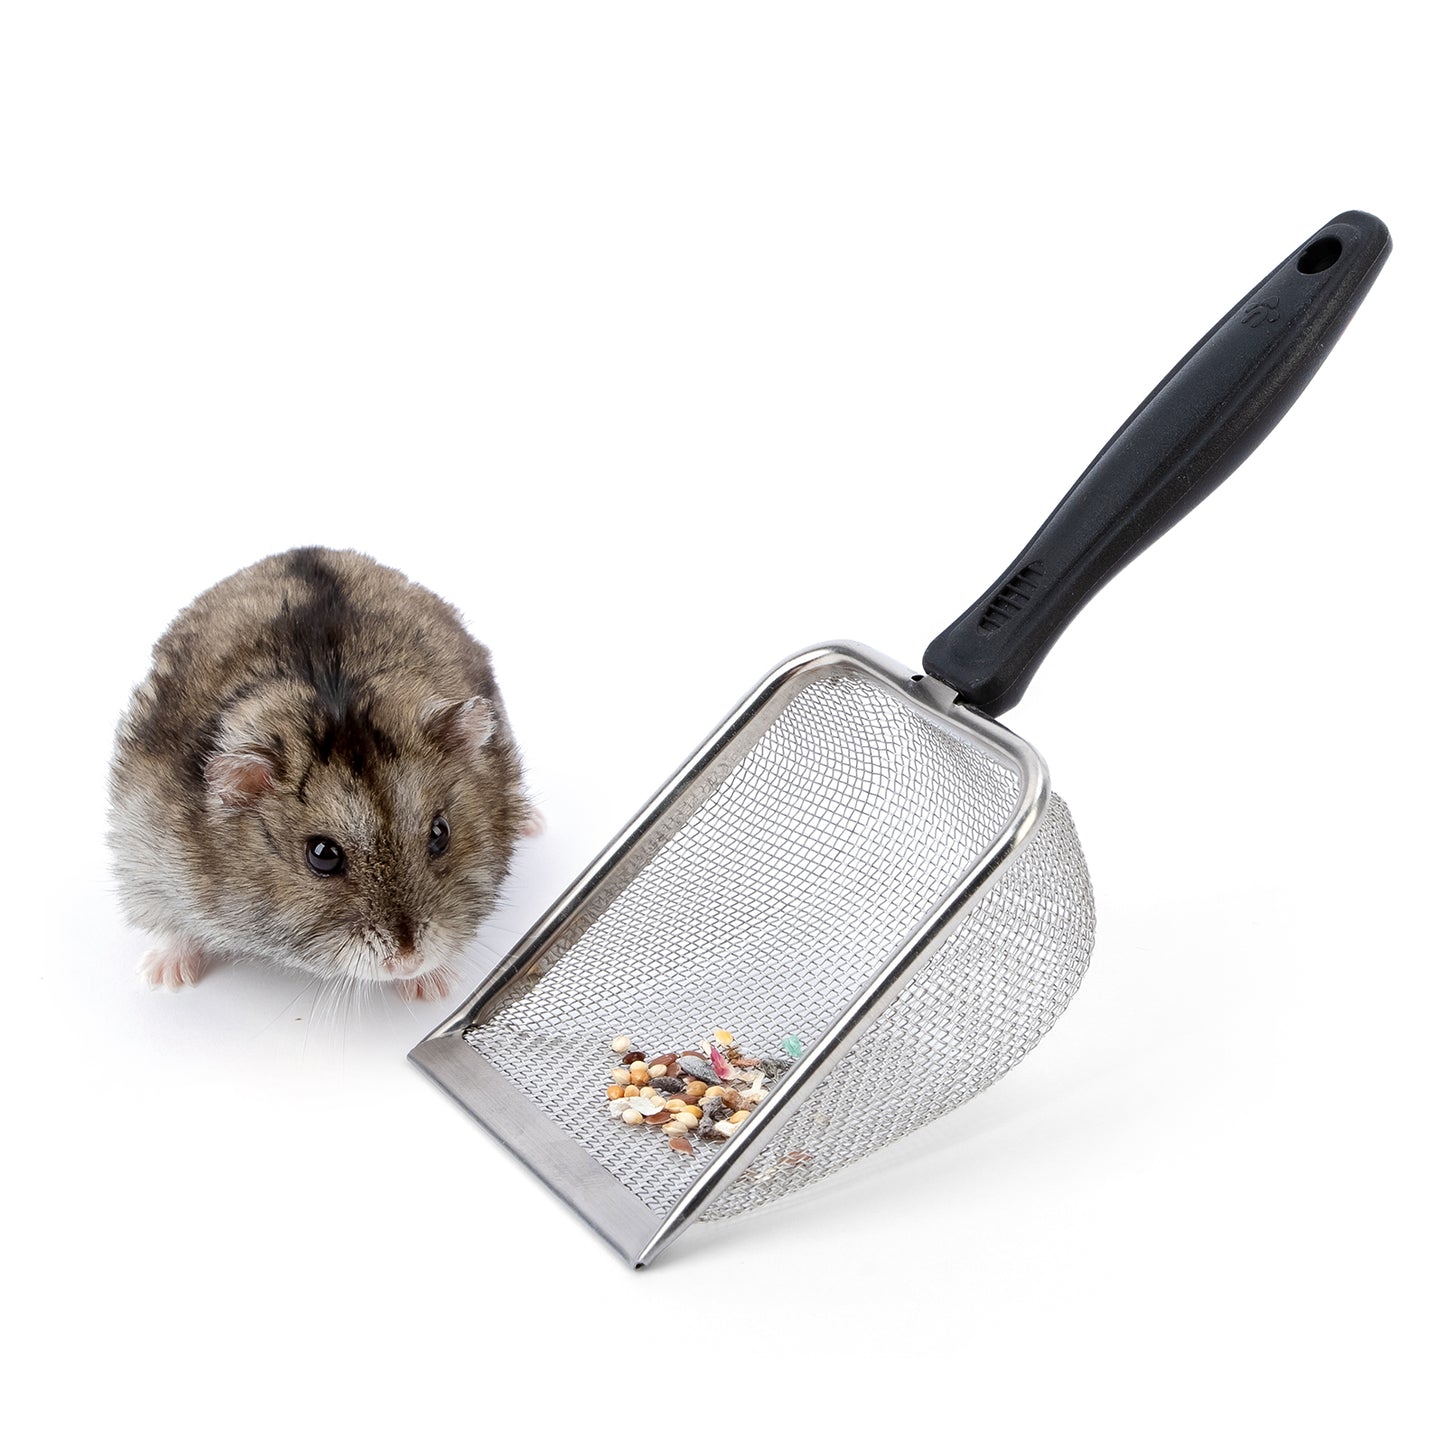 Niteangel Hamster Bath Sand Scoop - Stainless Steel Sand Substrate Scoop with Fine Mesh Mesh Sieve, Suitable for Small Animals Sand Bath Box